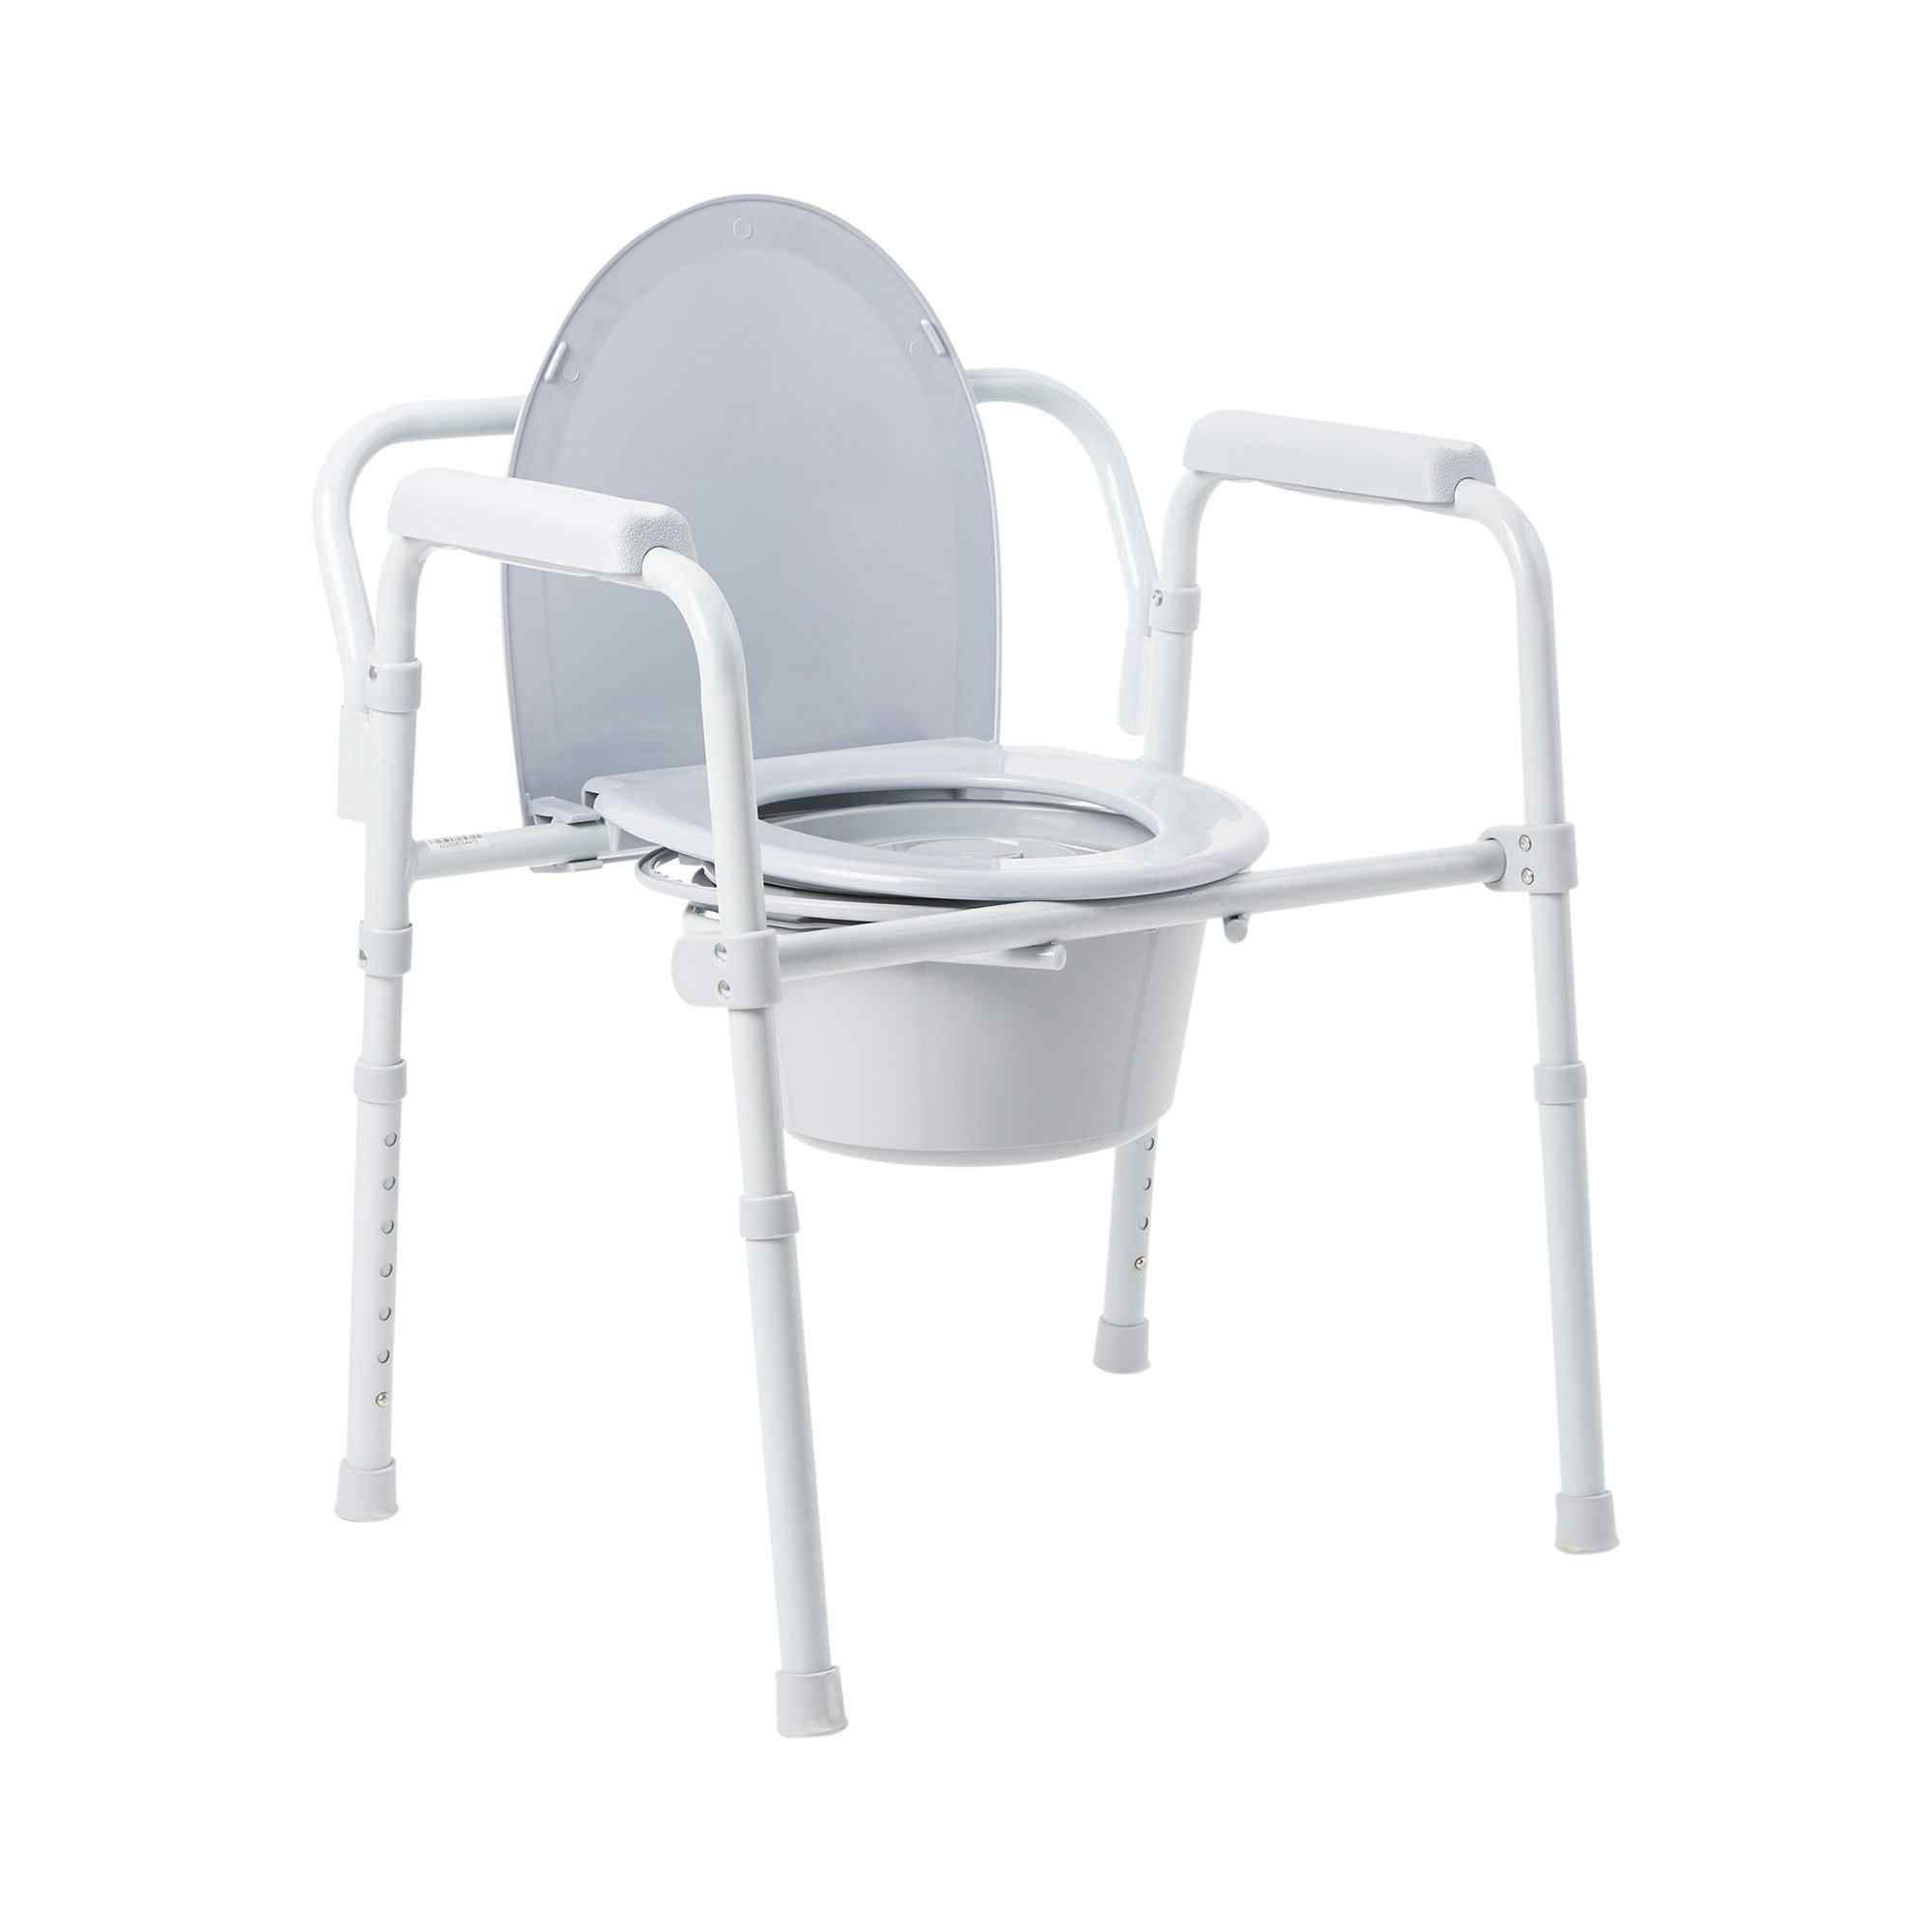 McKesson Fixed Arm Steel Folding Commode Chair, 146-11148-4, 13.5" - Case of 4